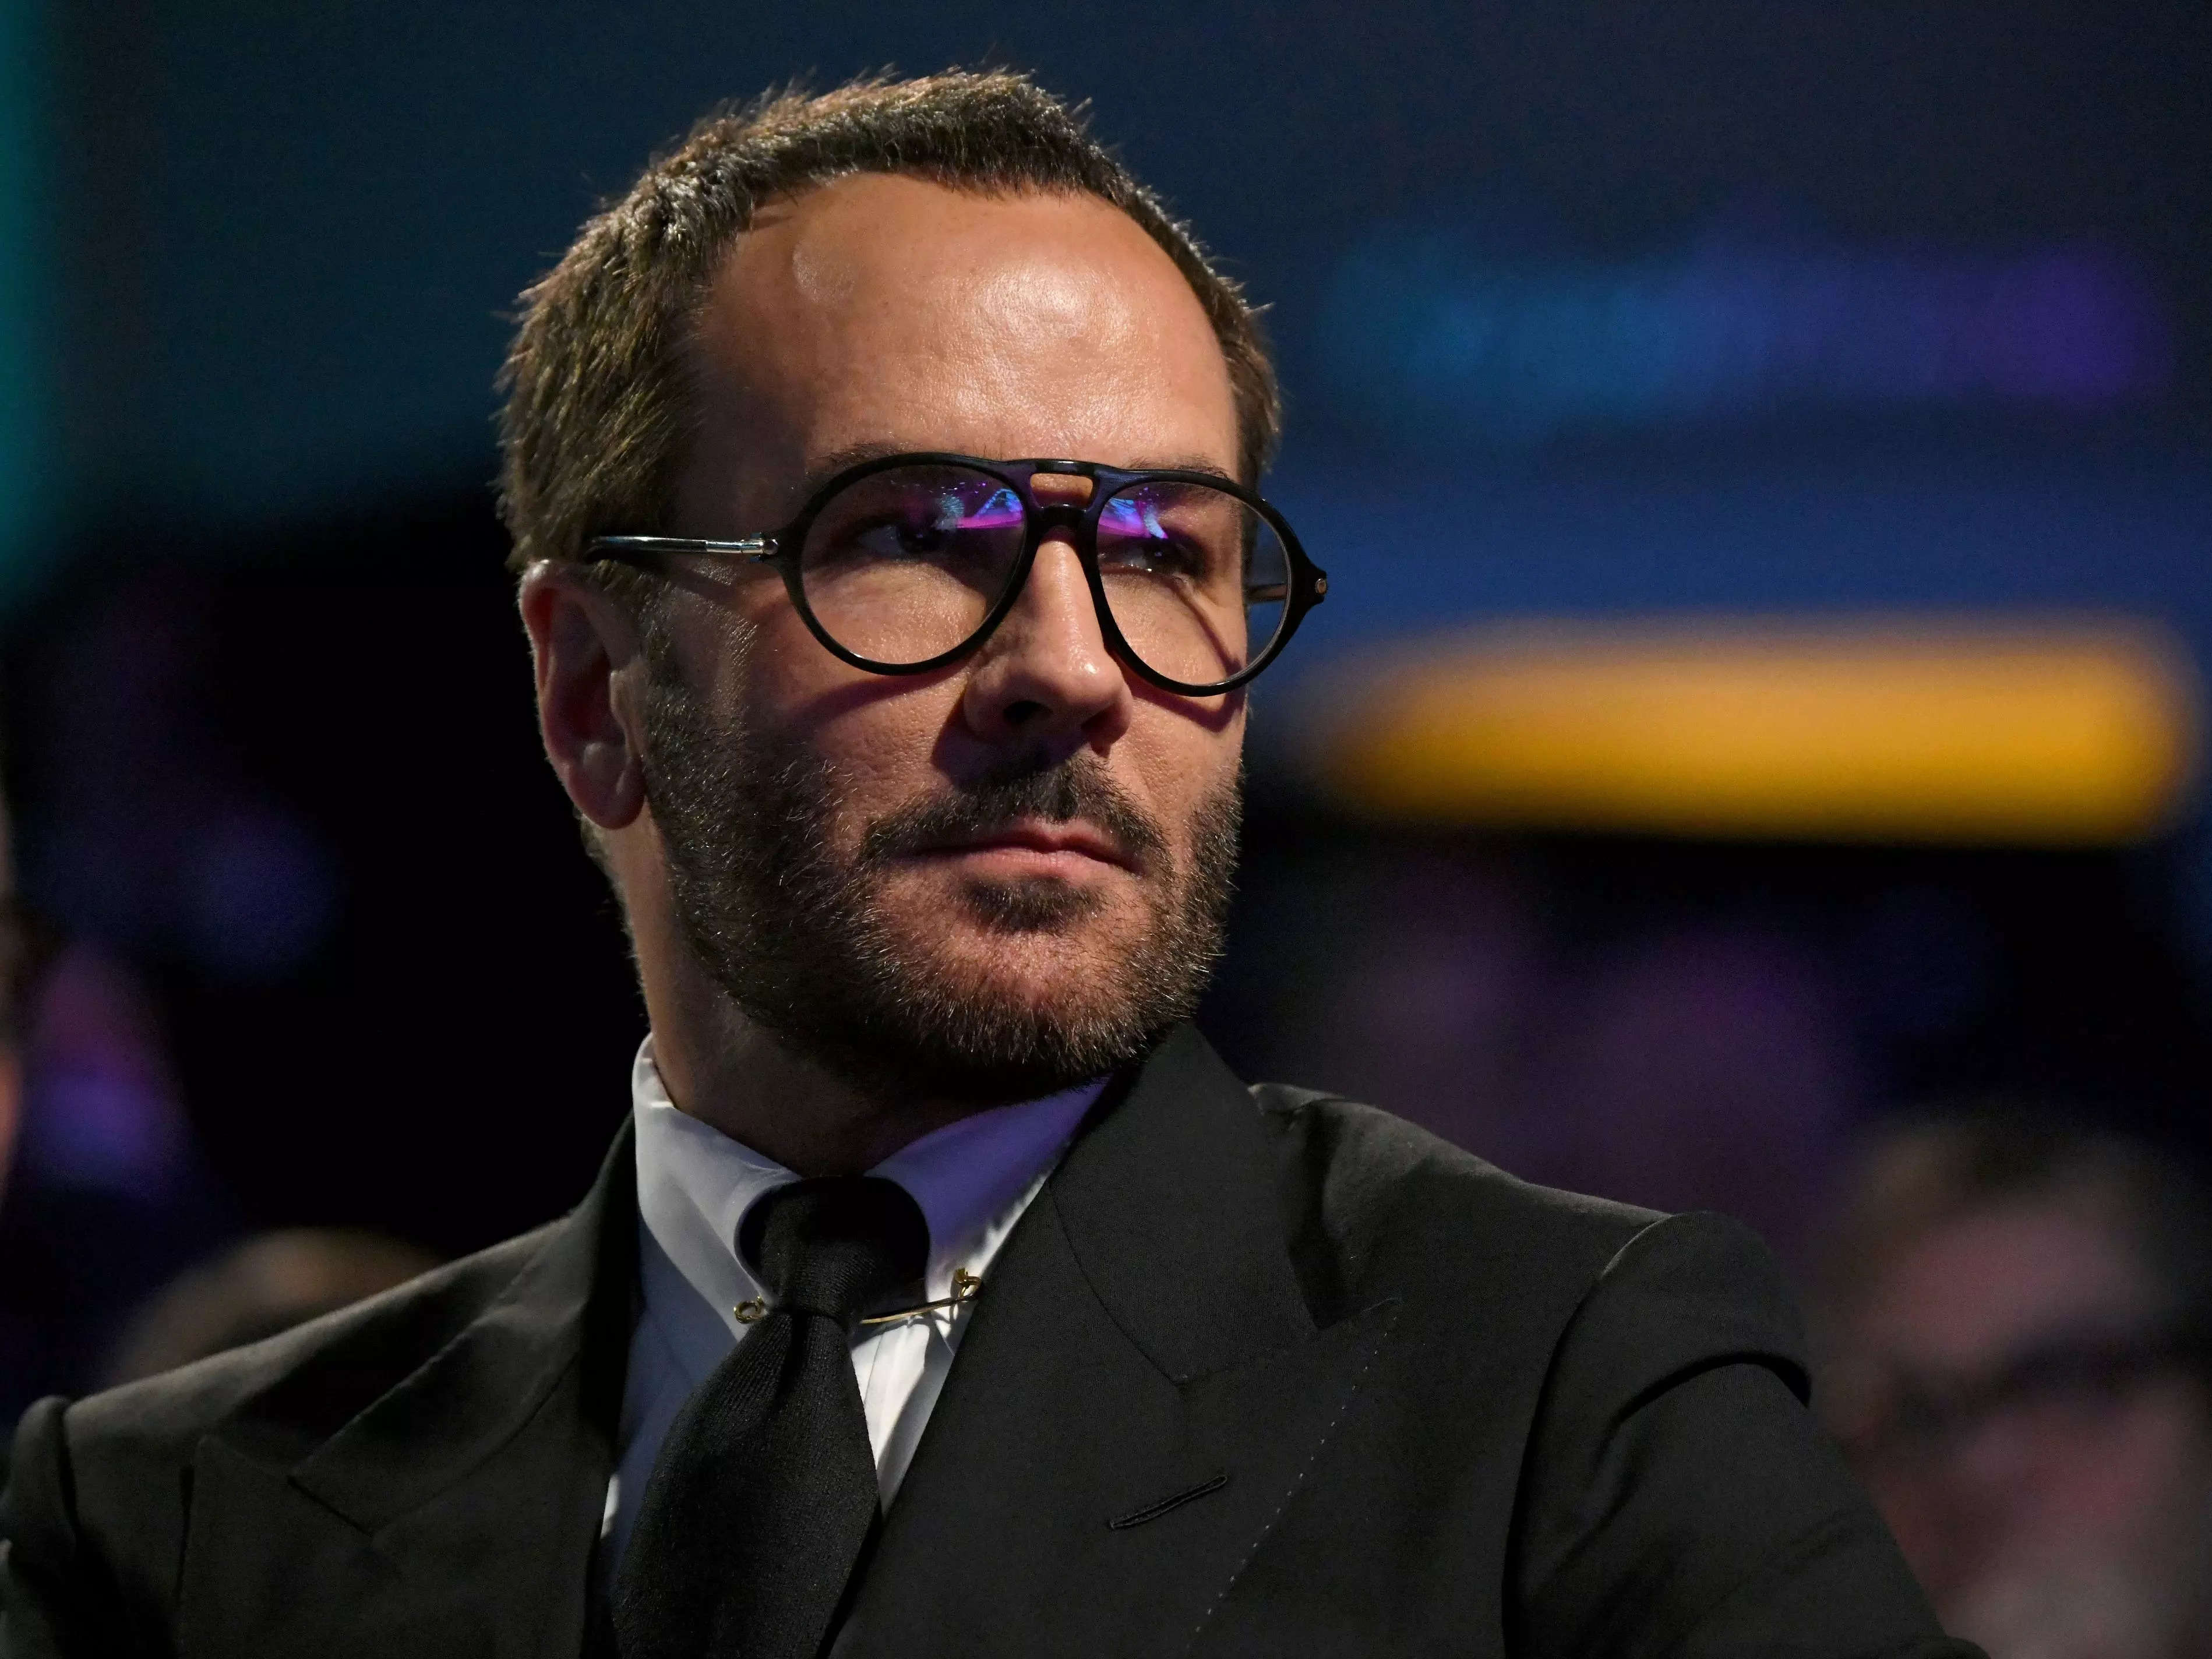 Luxury Brand Tom Ford Is Said to Explore Potential Sale - Bloomberg